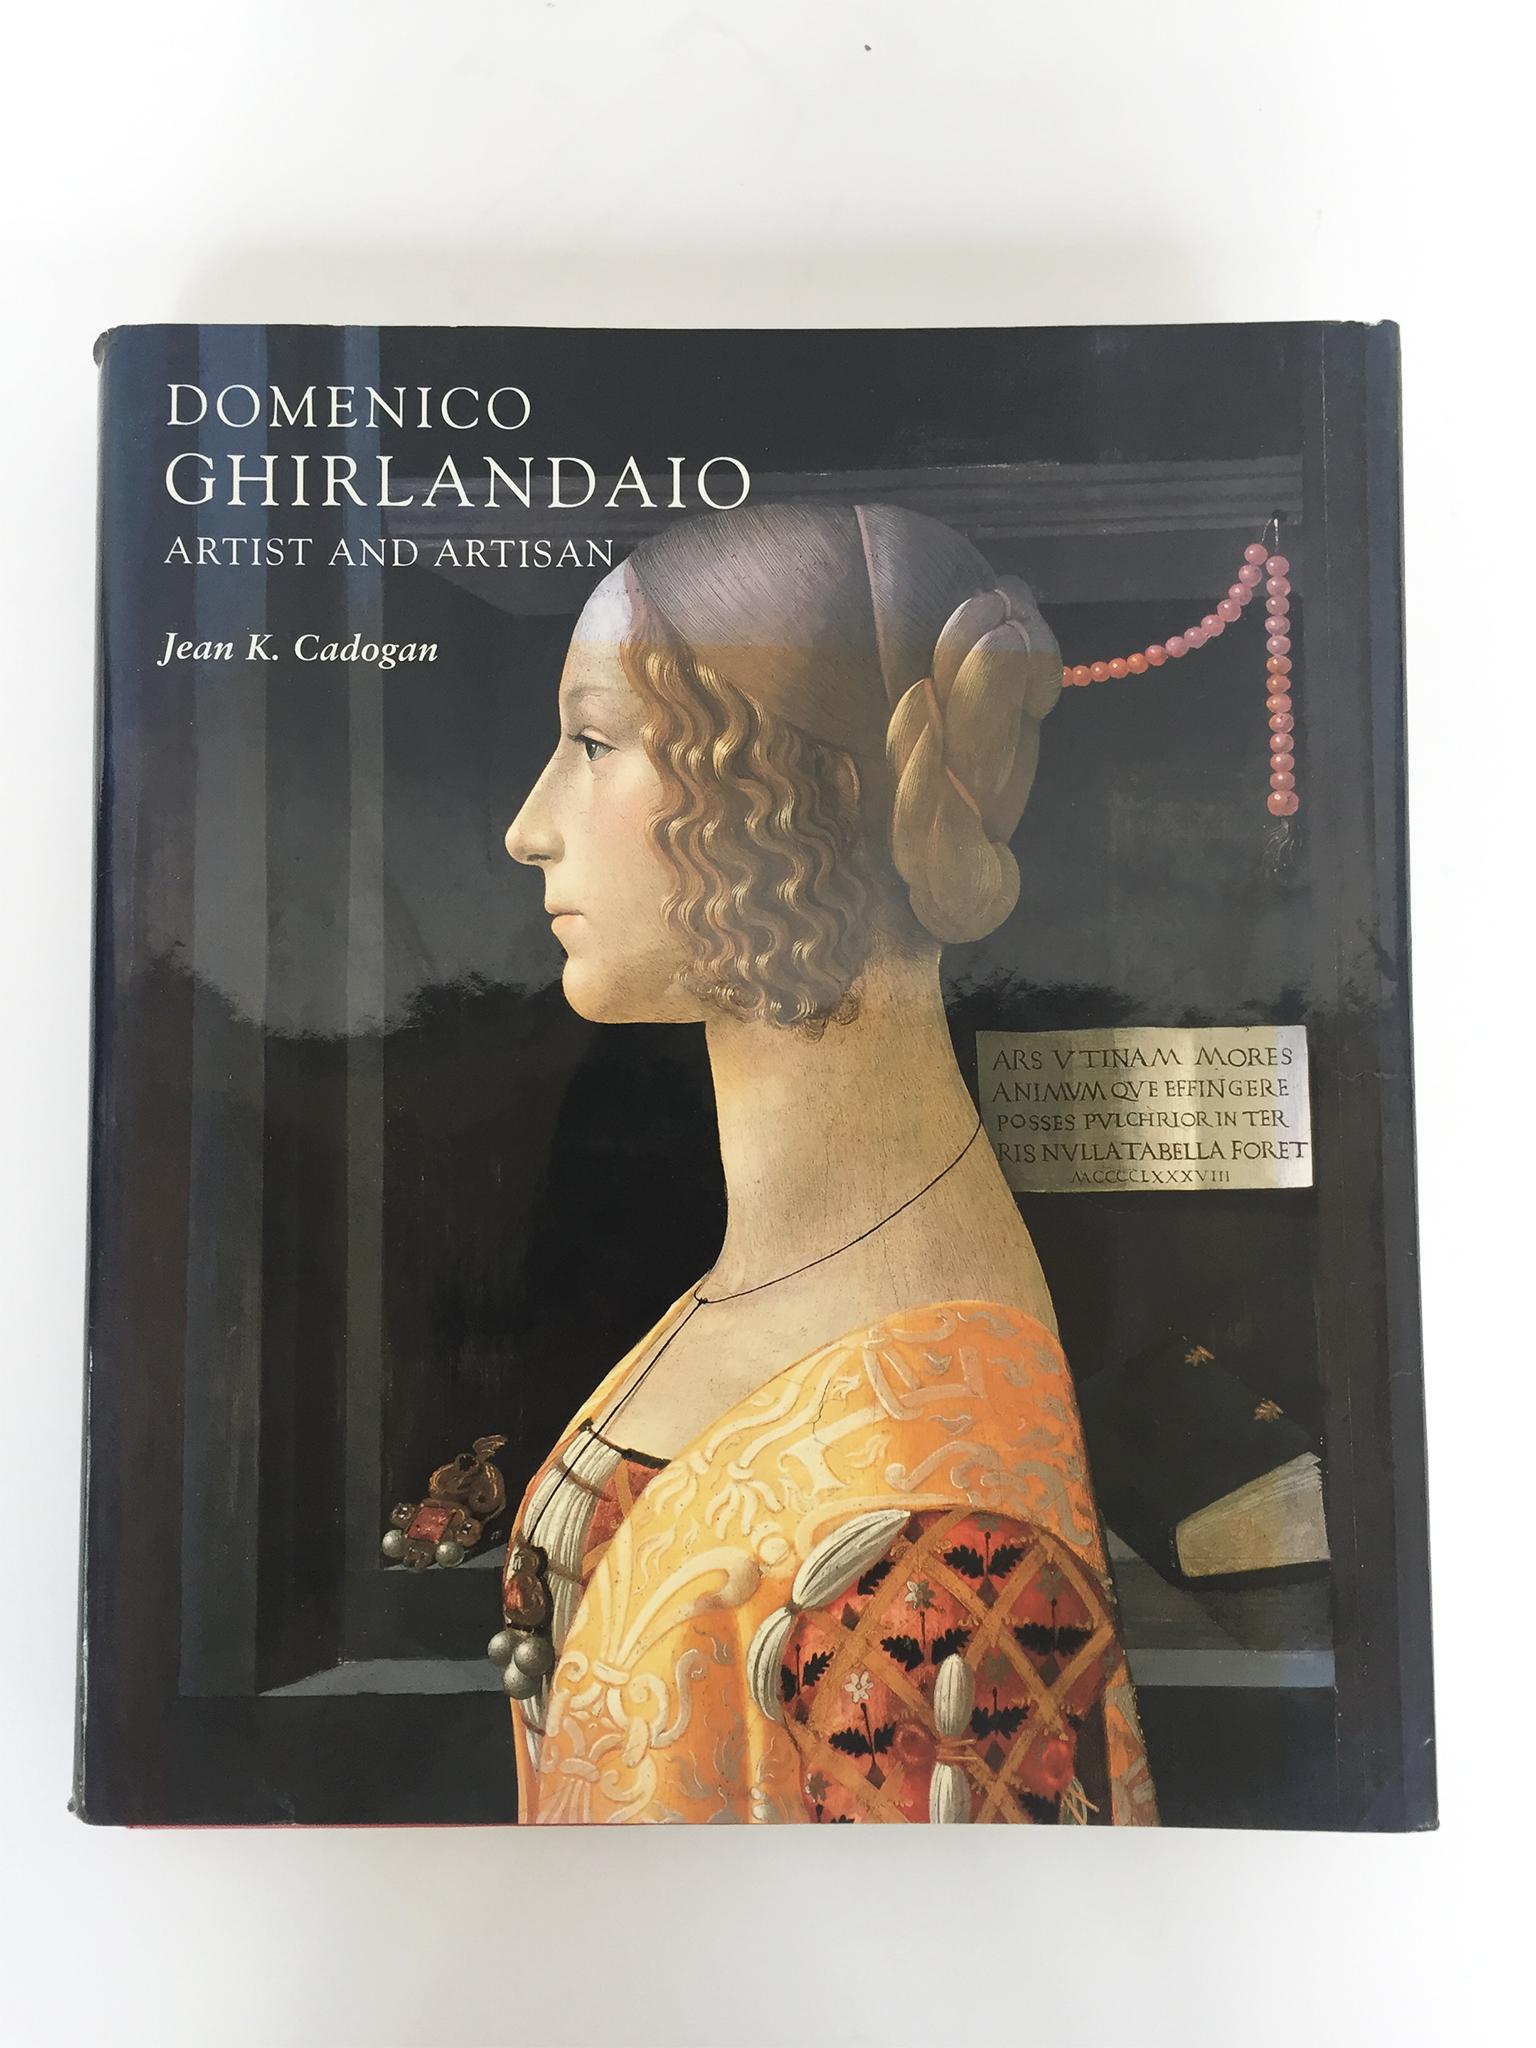 Domenico Ghirlandaio: Artist and Artisan
by Jean K. Cadogan
Published by Yale University Press
Hardcover
432 pages 
56 black & white + 90 color illustrations
Cloth binding with glossy book jacket
Out of print

From the book